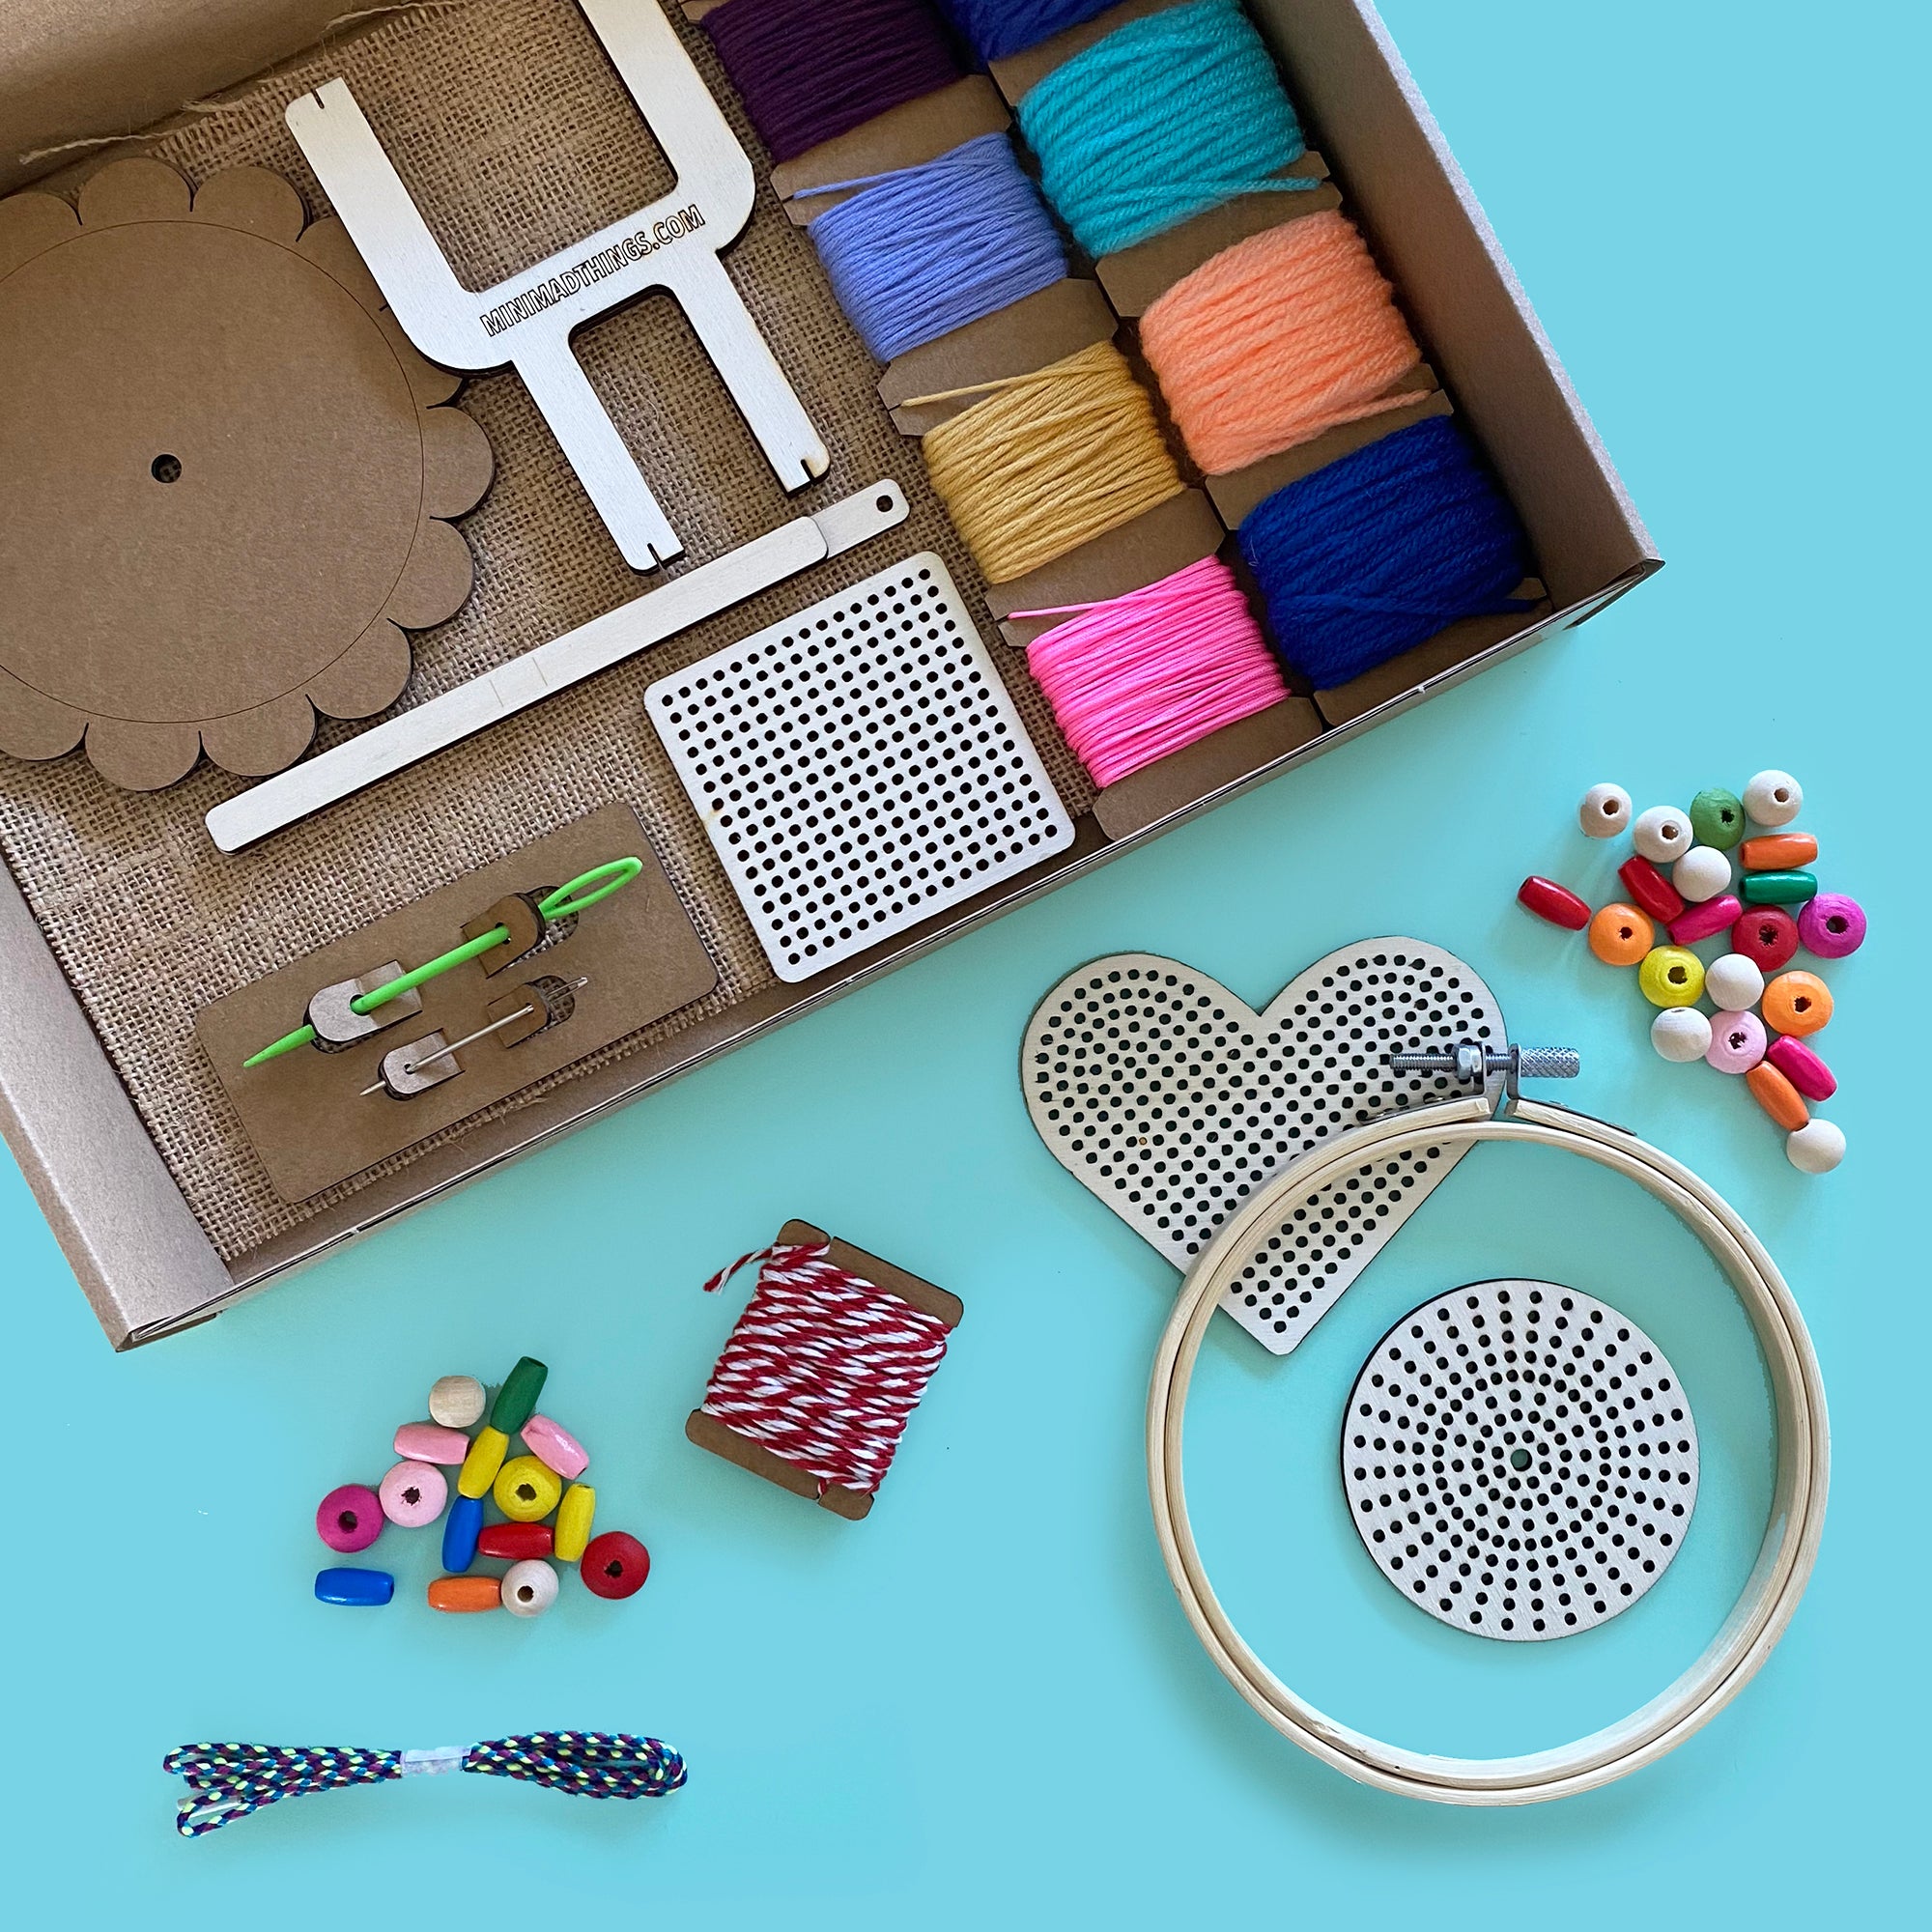 Embroidery and Weaving Craft Box